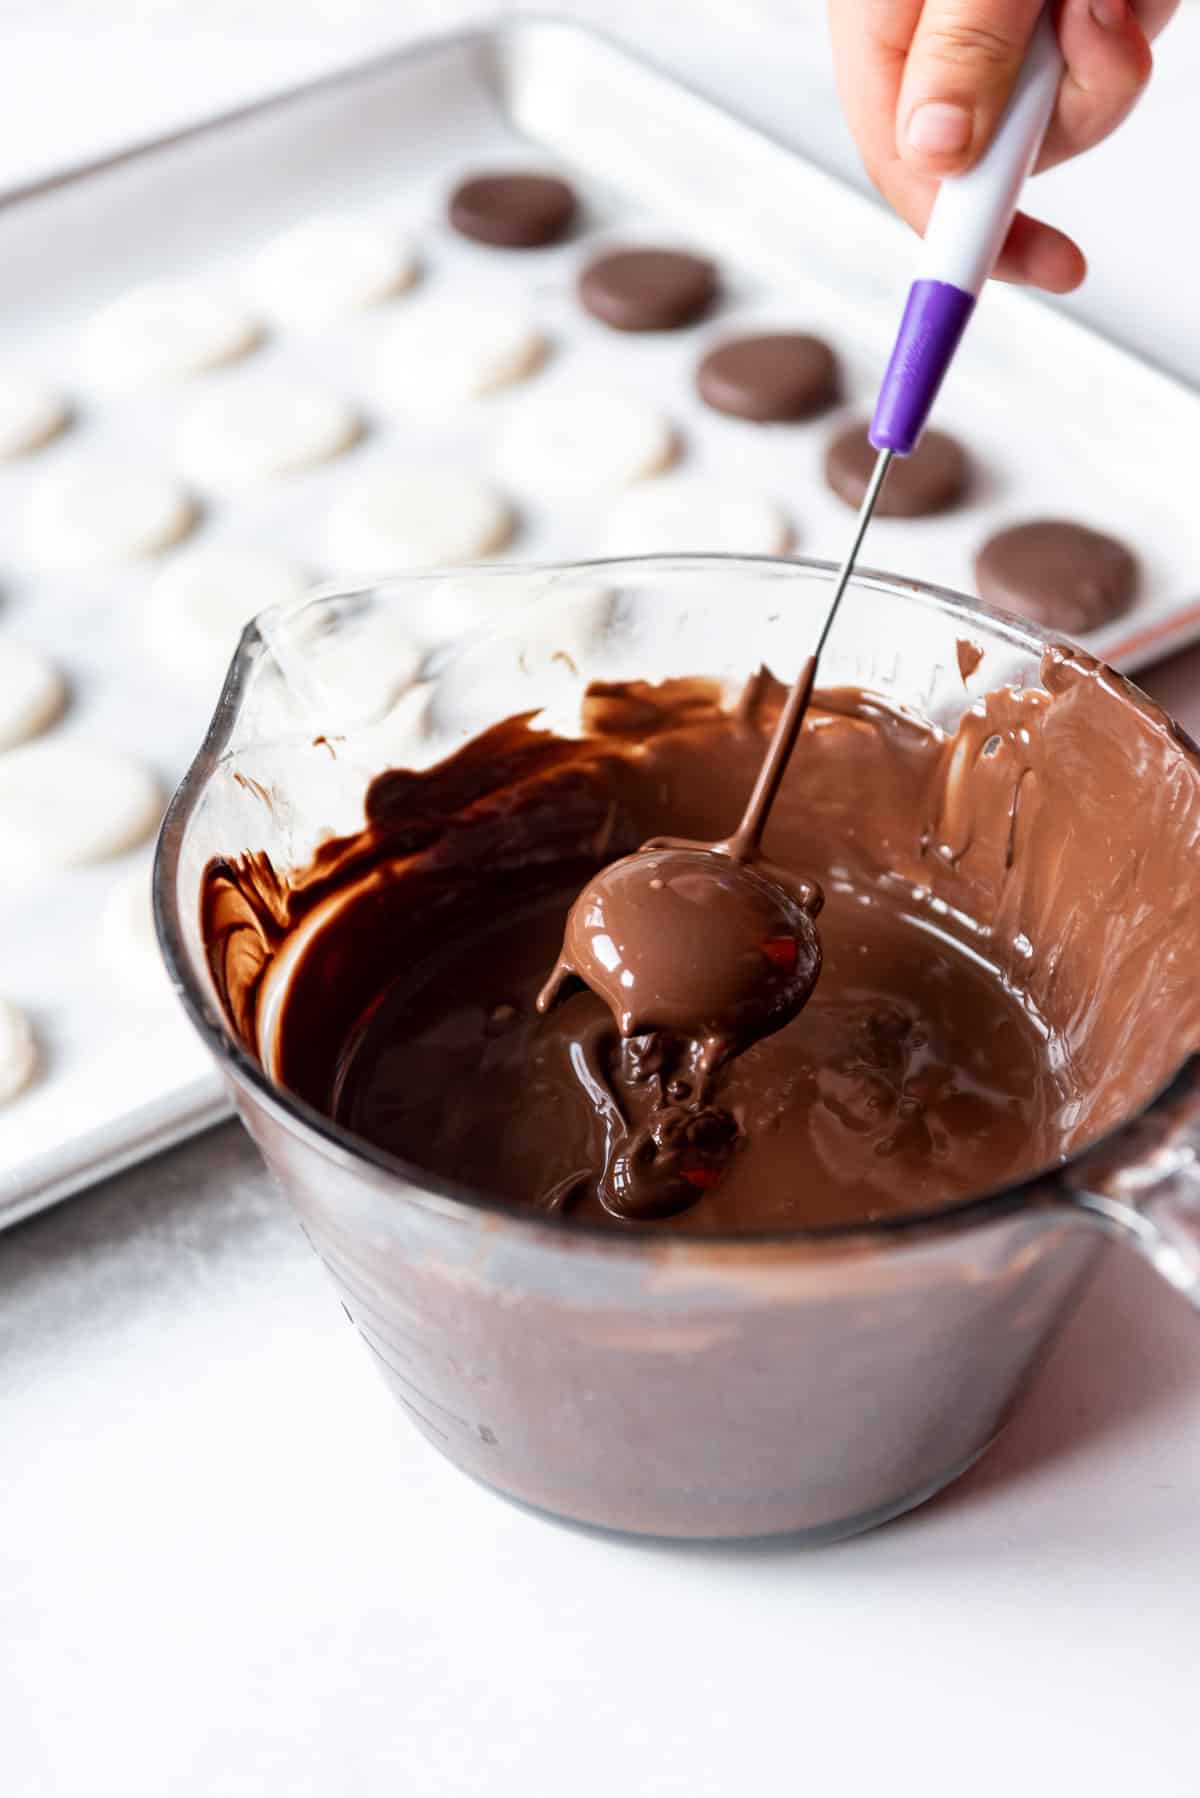 A chocolate dipping tool holding a recently dipped peppermint patty center over a bowl of melted chocolate.